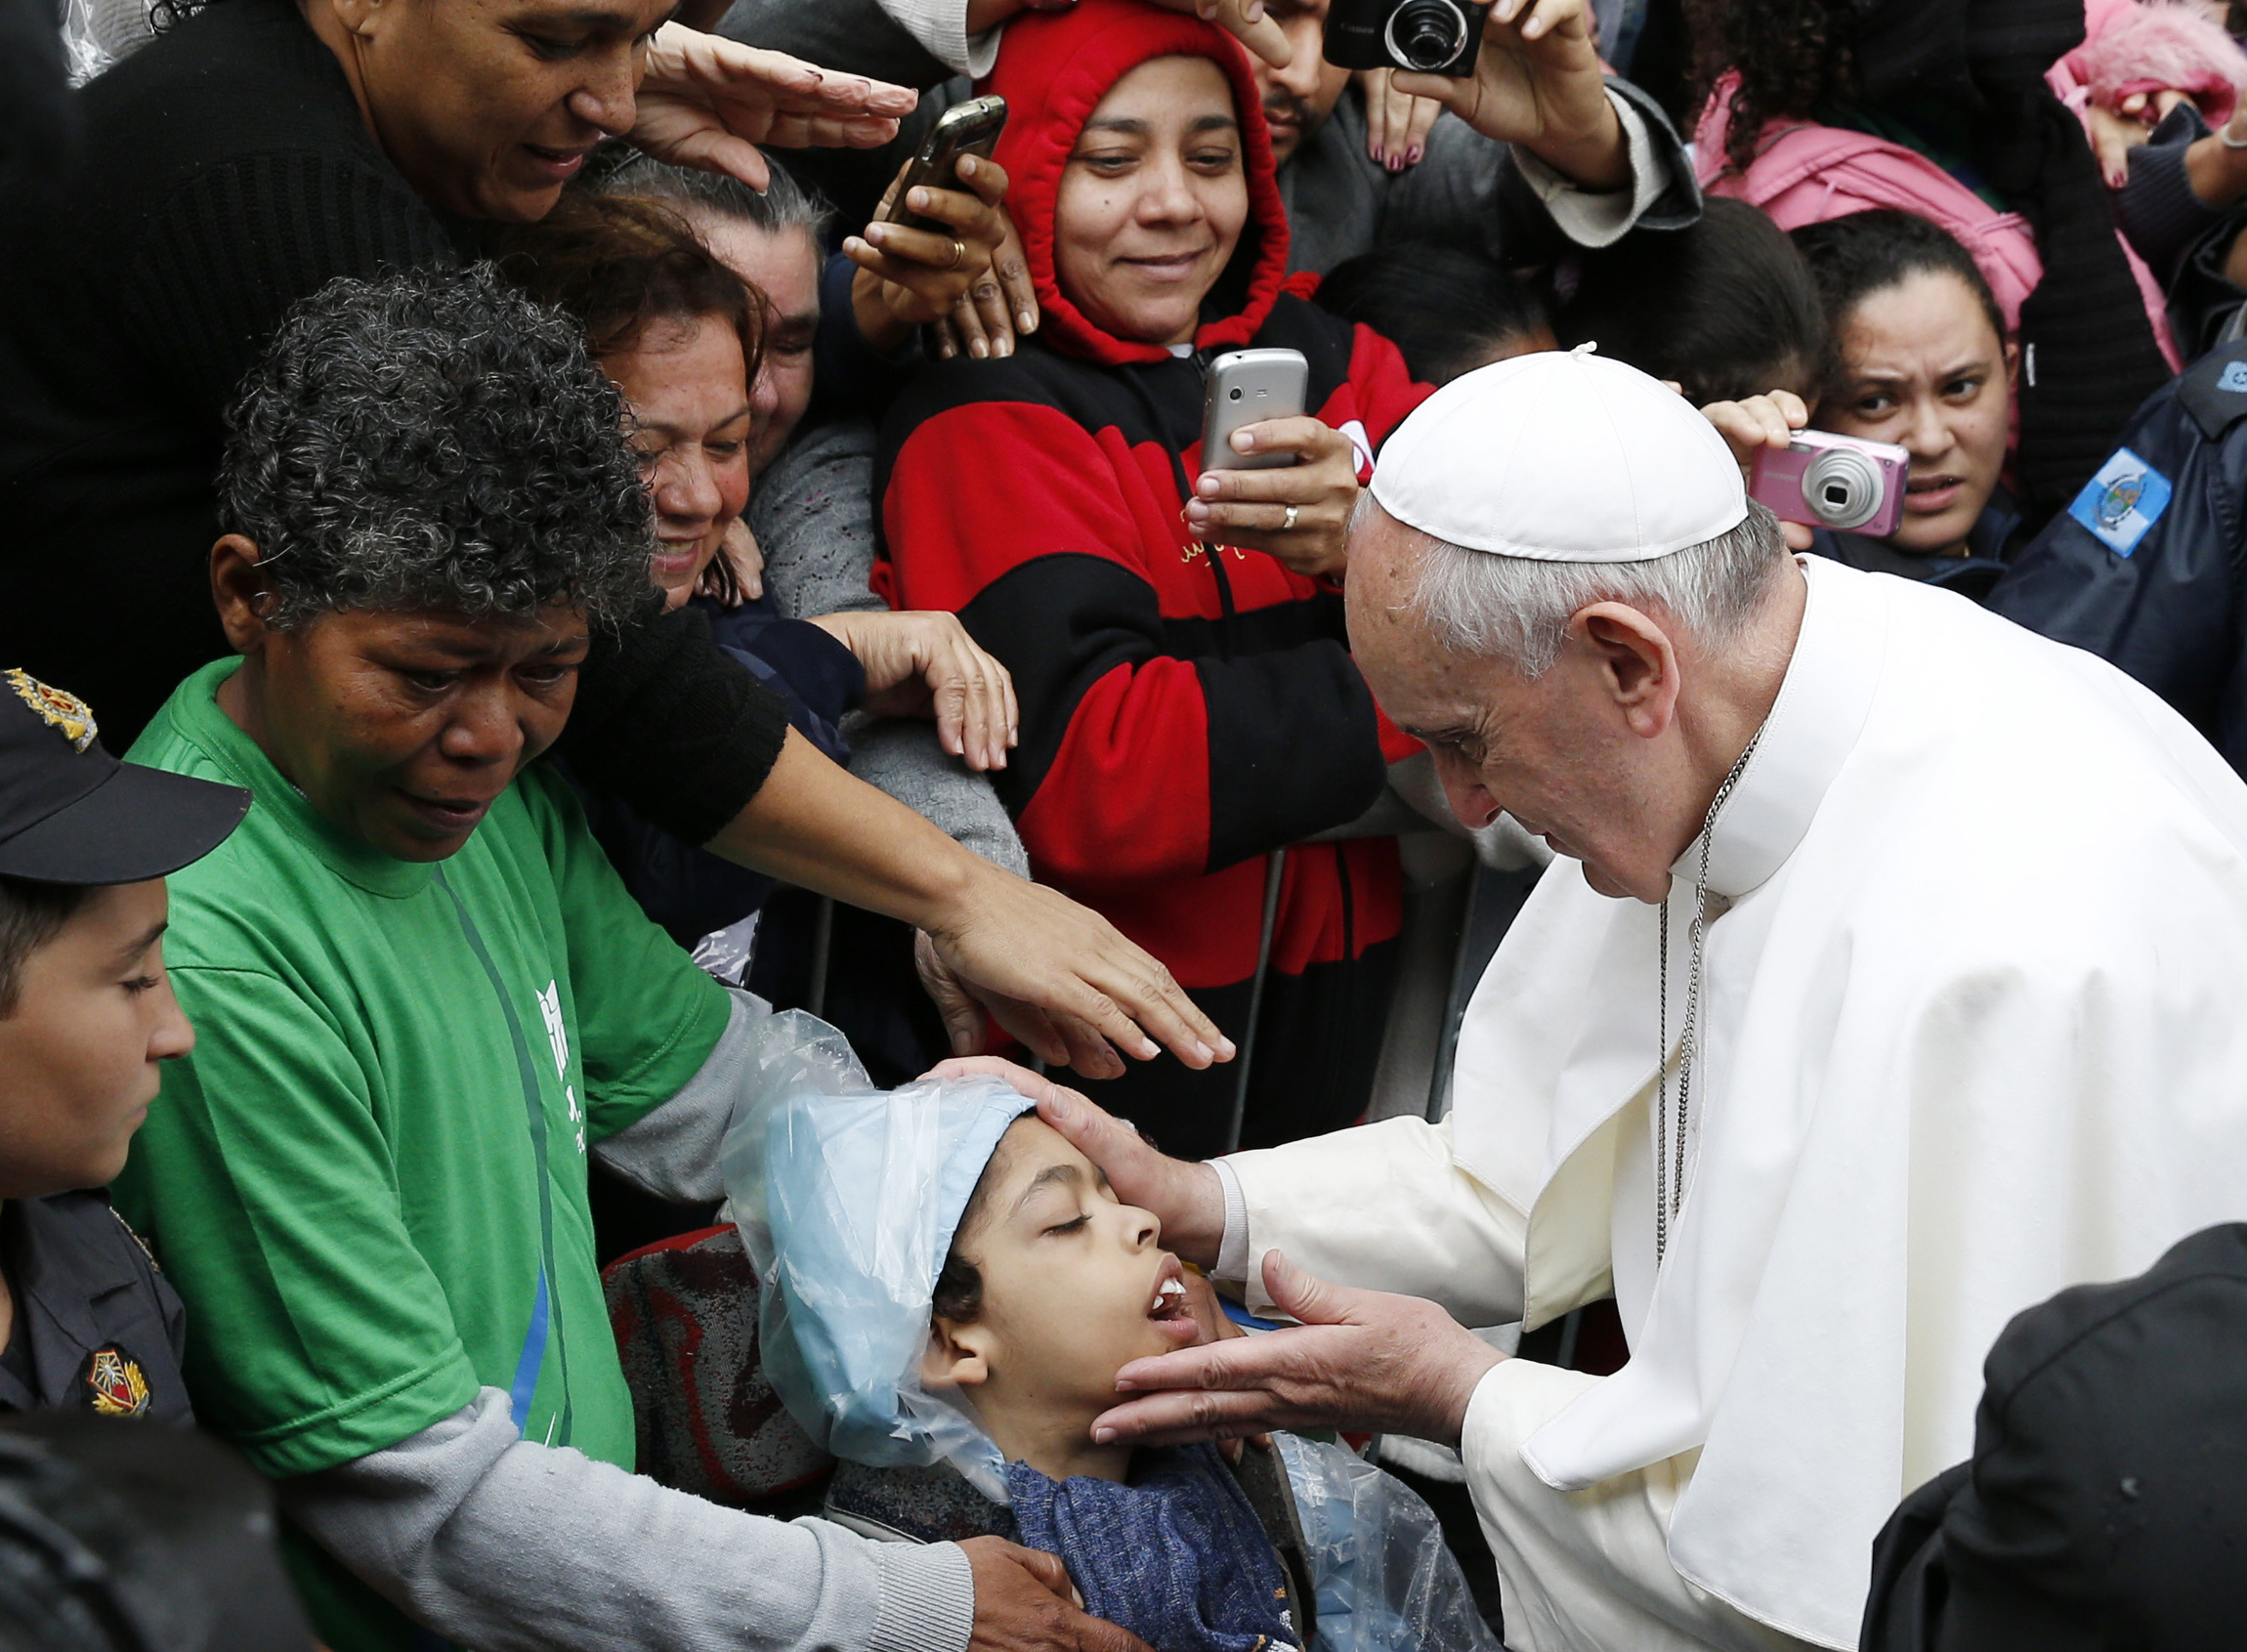 Pope Francis blesses boy during visit to slum complex in Brazil